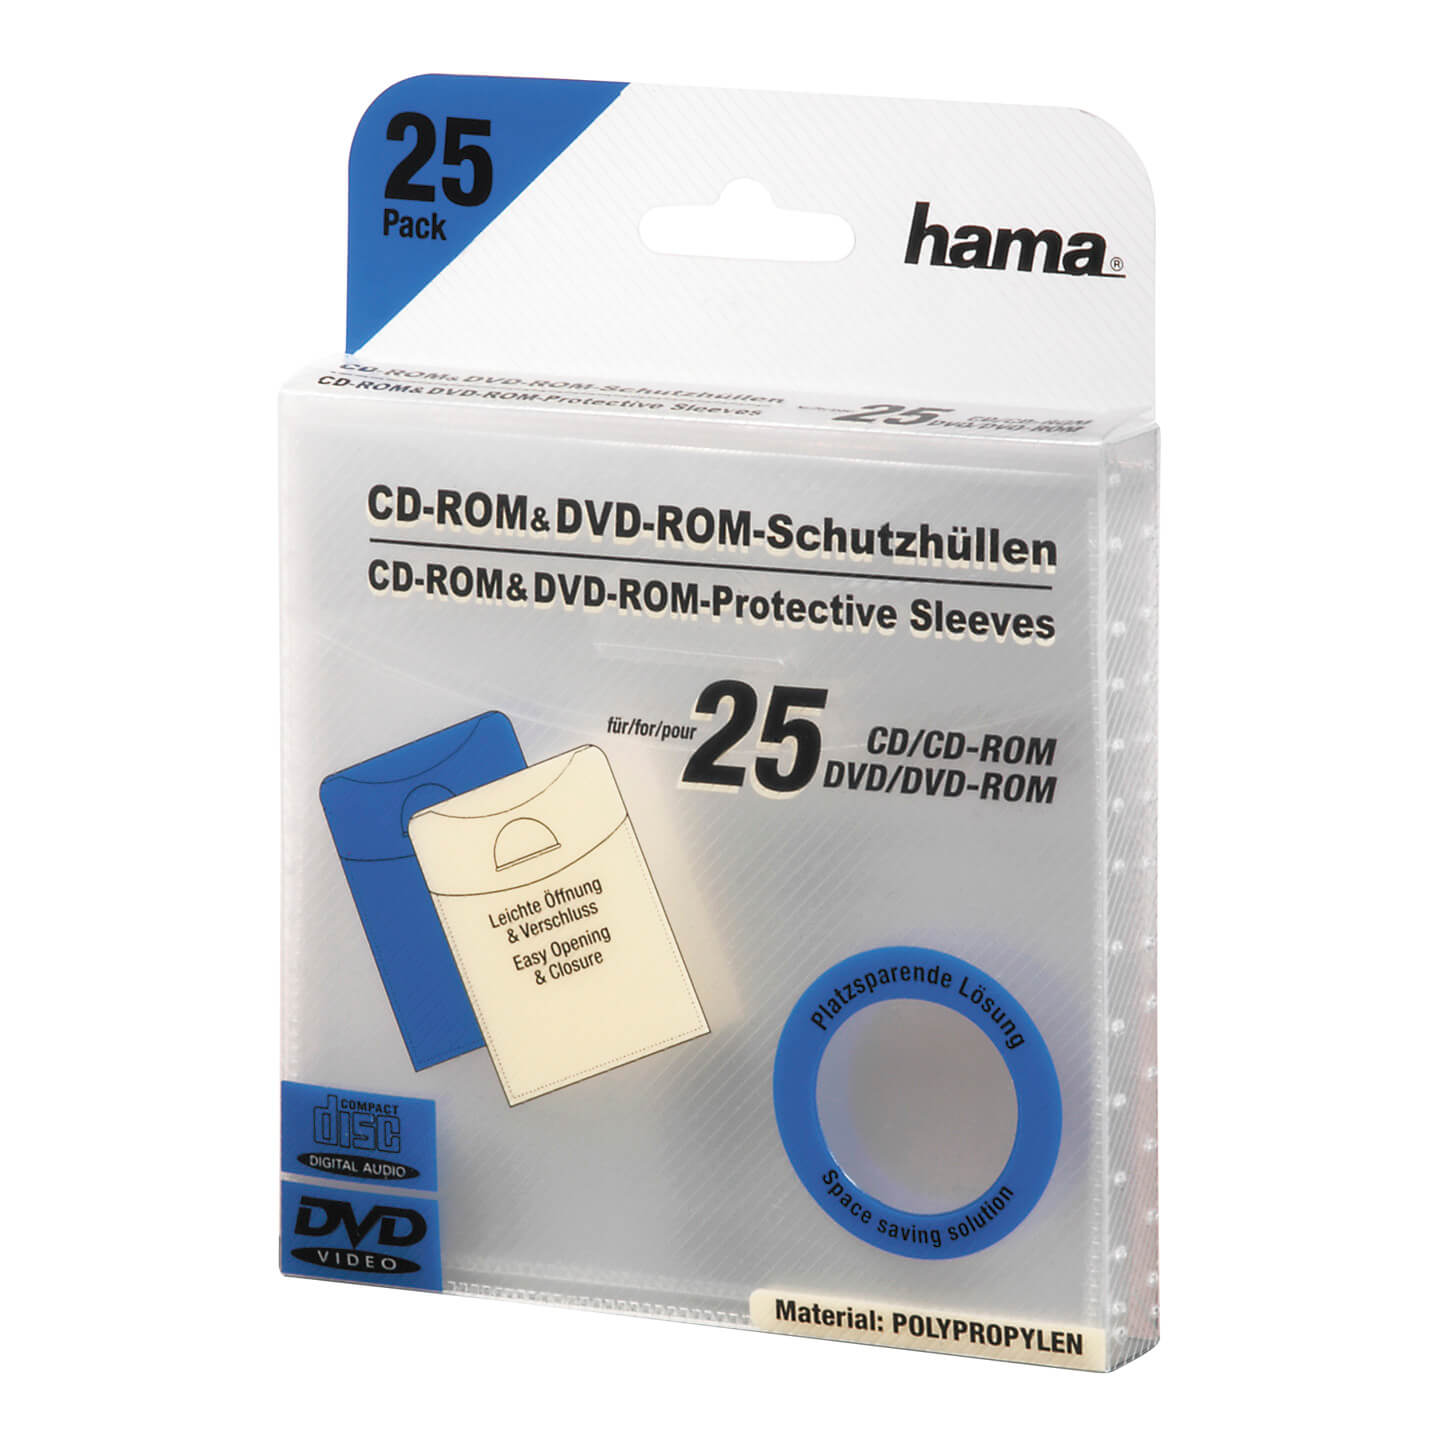 HAMA CD/DVD Protective Sleeves 25, transparent